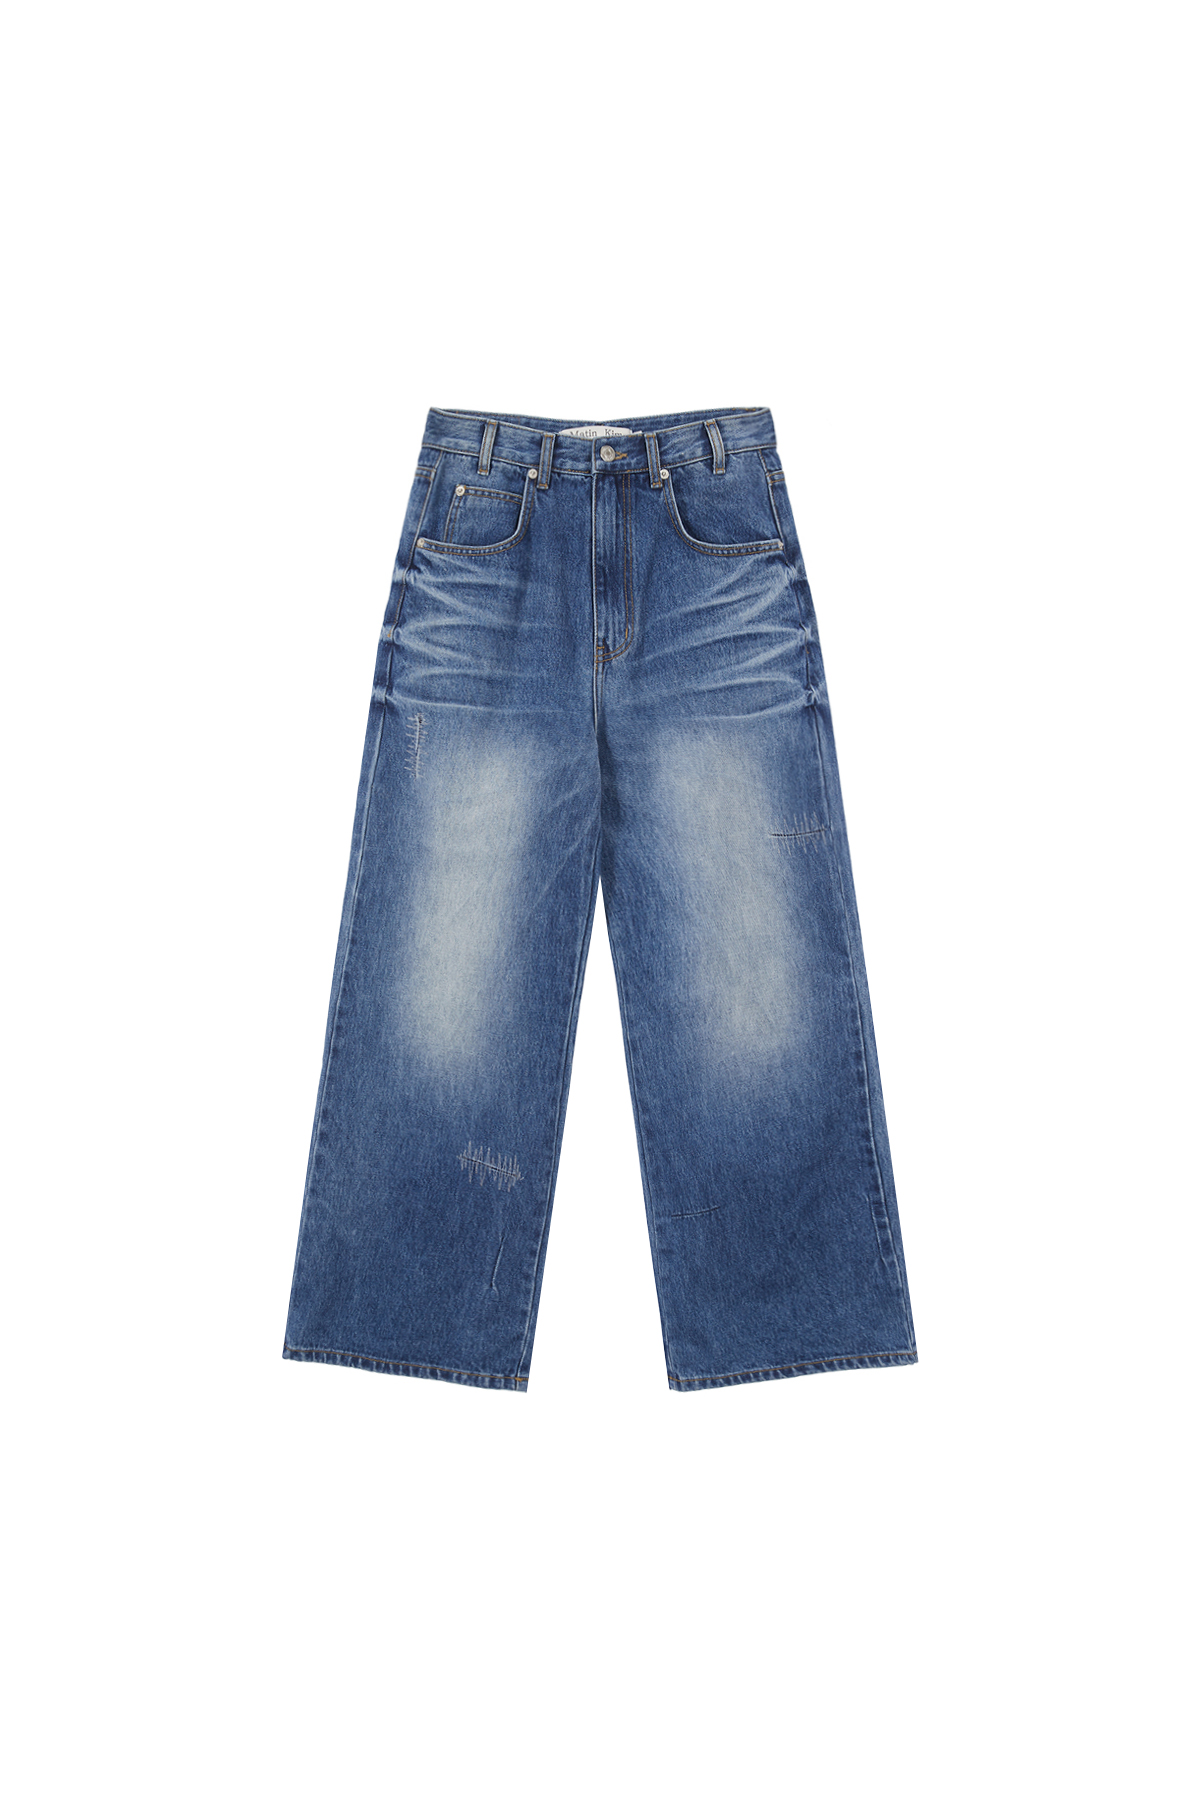 EMBROIDERY BRUSHED LOOSE SILHOUETTE DENIM PANTS IN BLUE